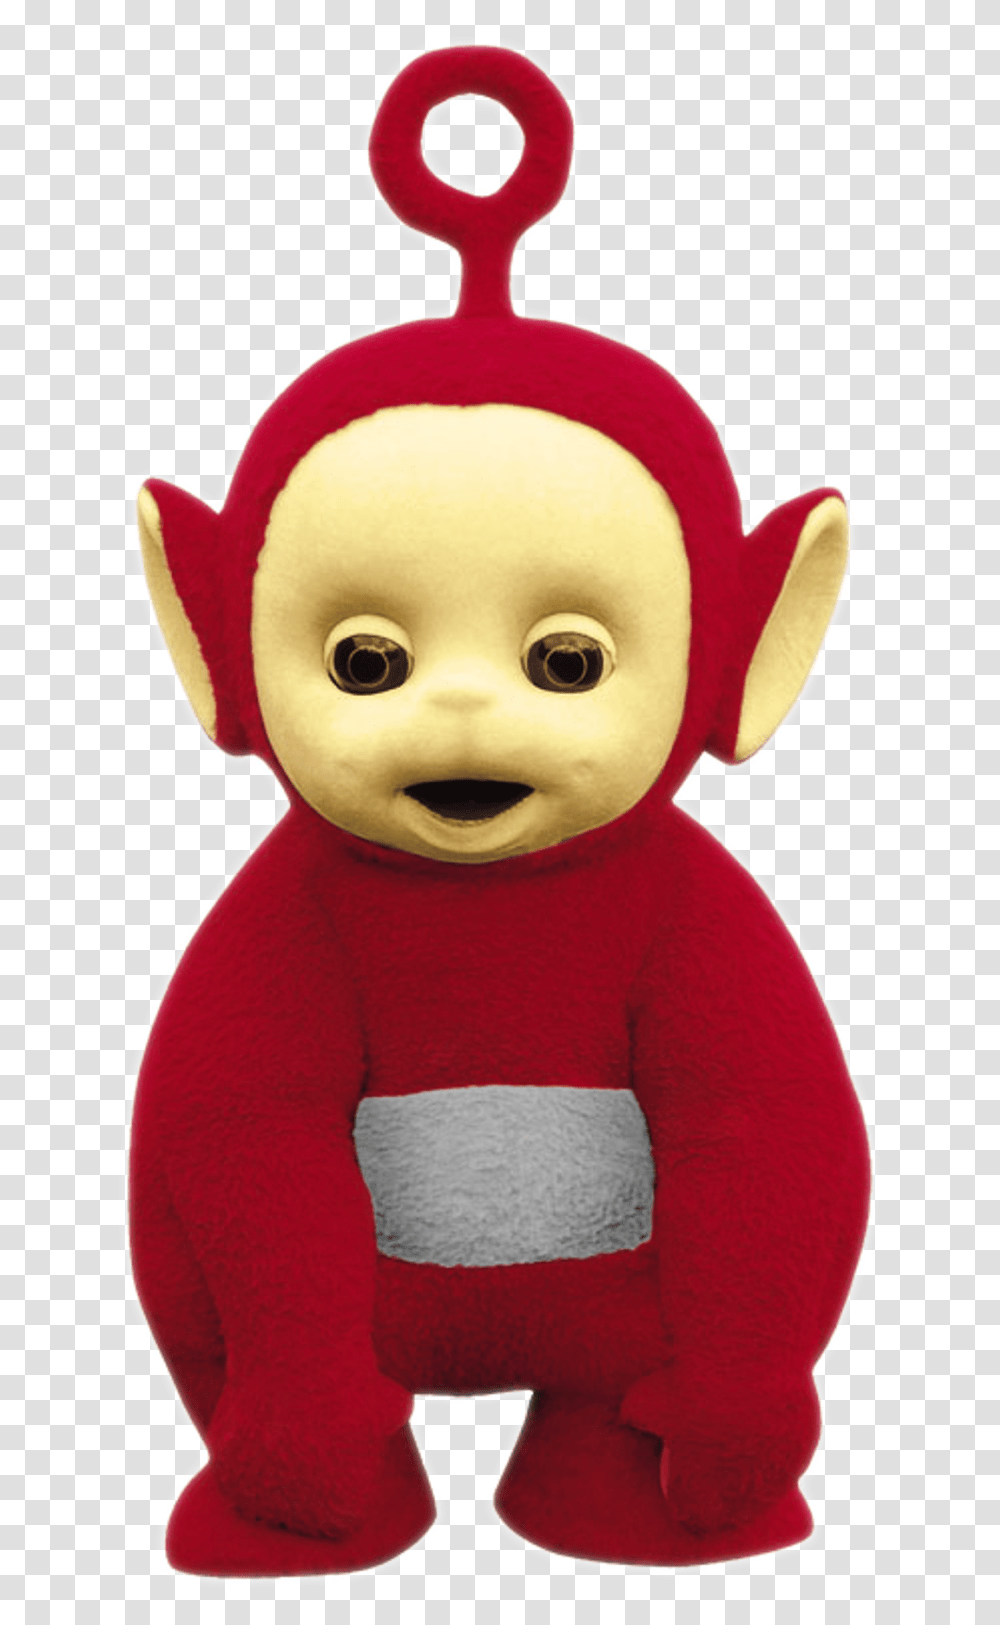 Teletubbies Teletubbies Po On Teletubbies, Plush, Toy, Doll, Mascot Transparent Png